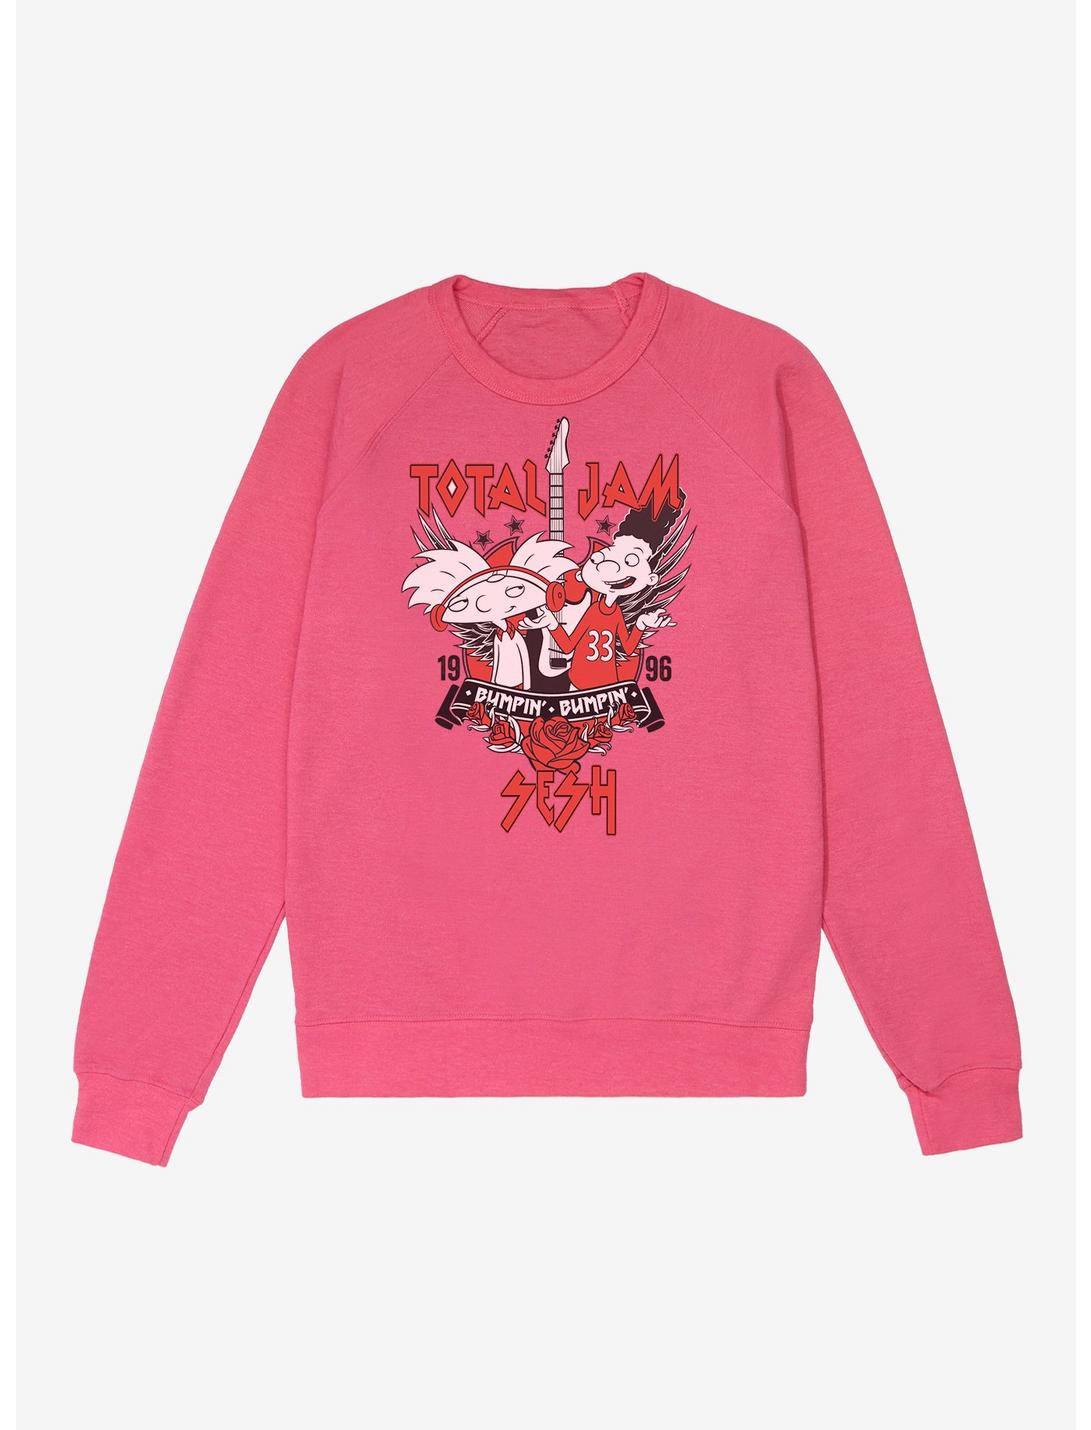 Hey Arnold! Total Jam Sesh 1996 French Terry Sweatshirt, HELICONIA HEATHER, hi-res